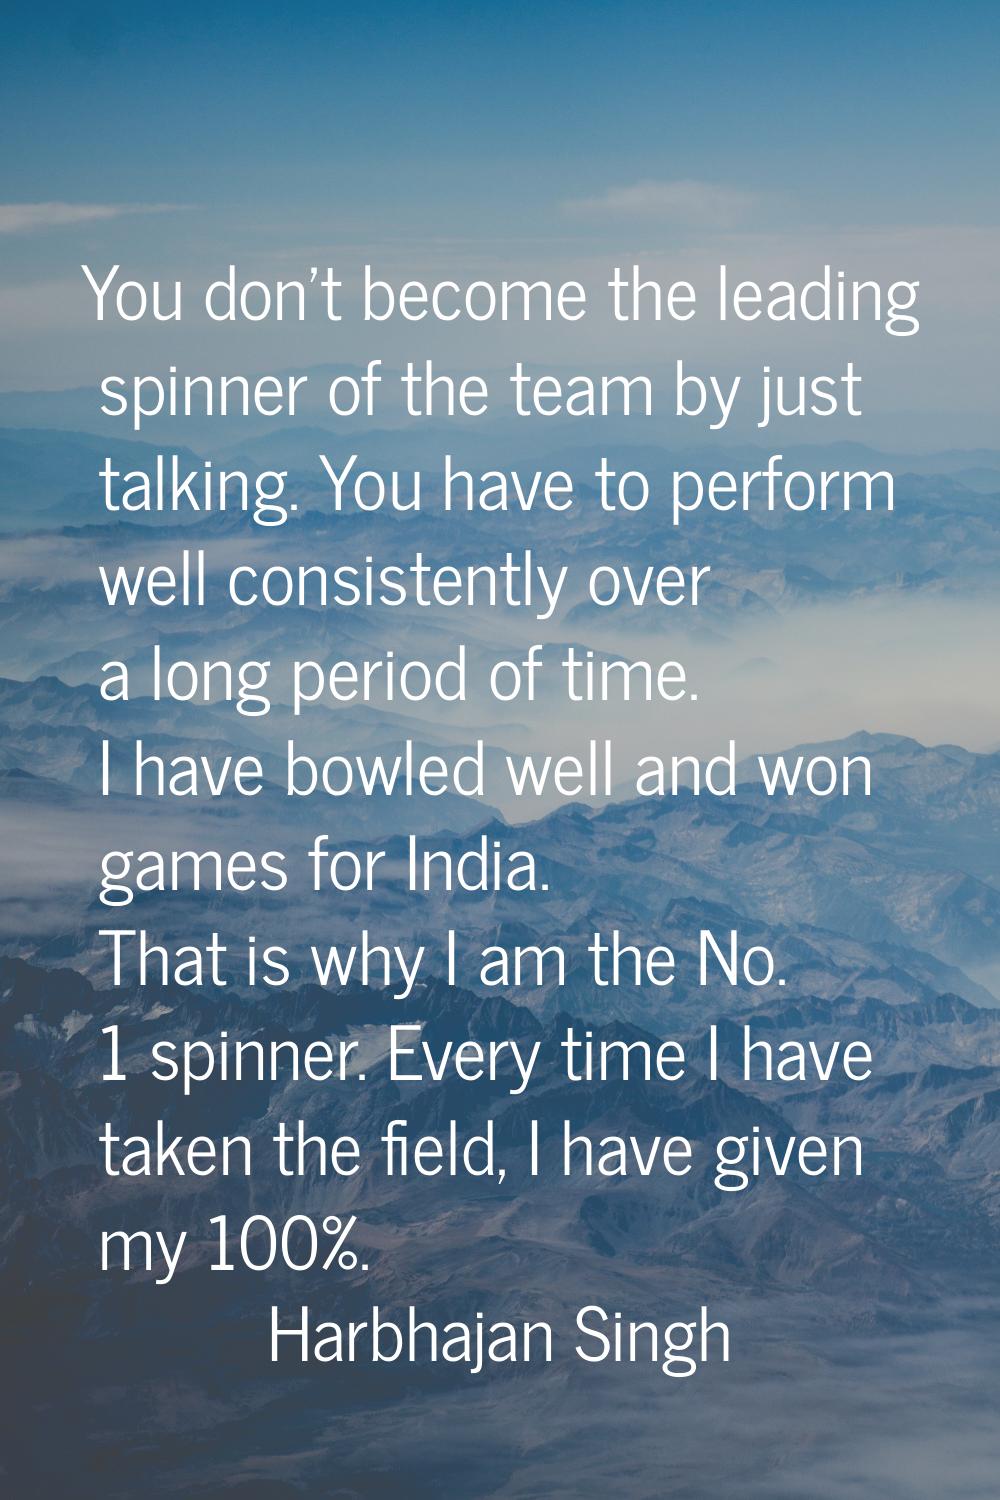 You don't become the leading spinner of the team by just talking. You have to perform well consiste